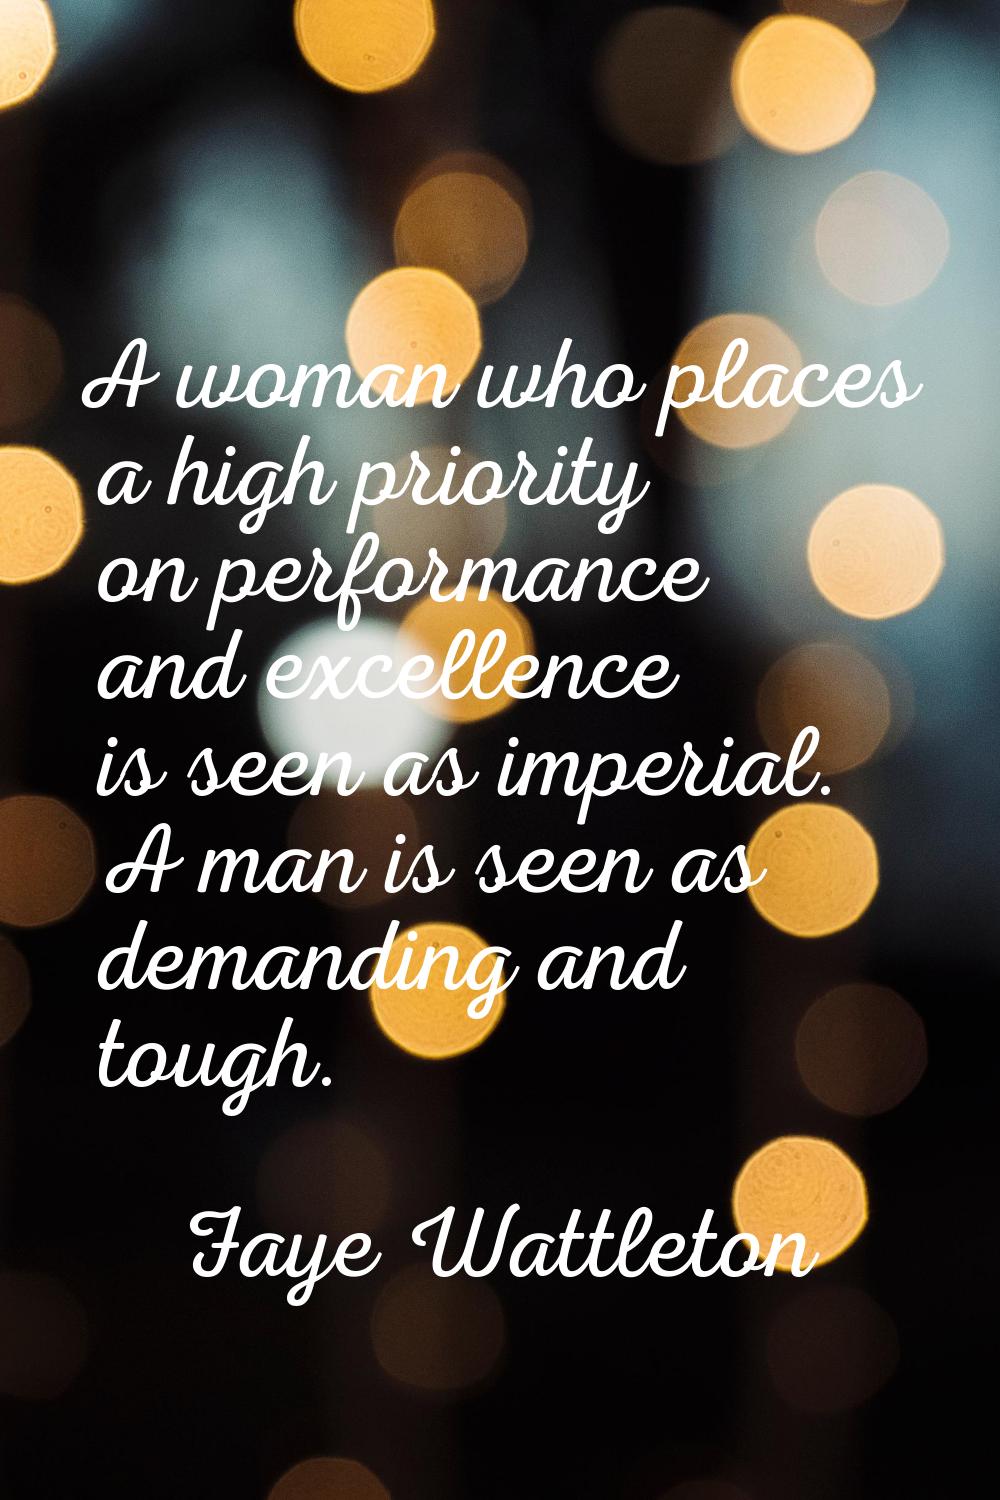 A woman who places a high priority on performance and excellence is seen as imperial. A man is seen